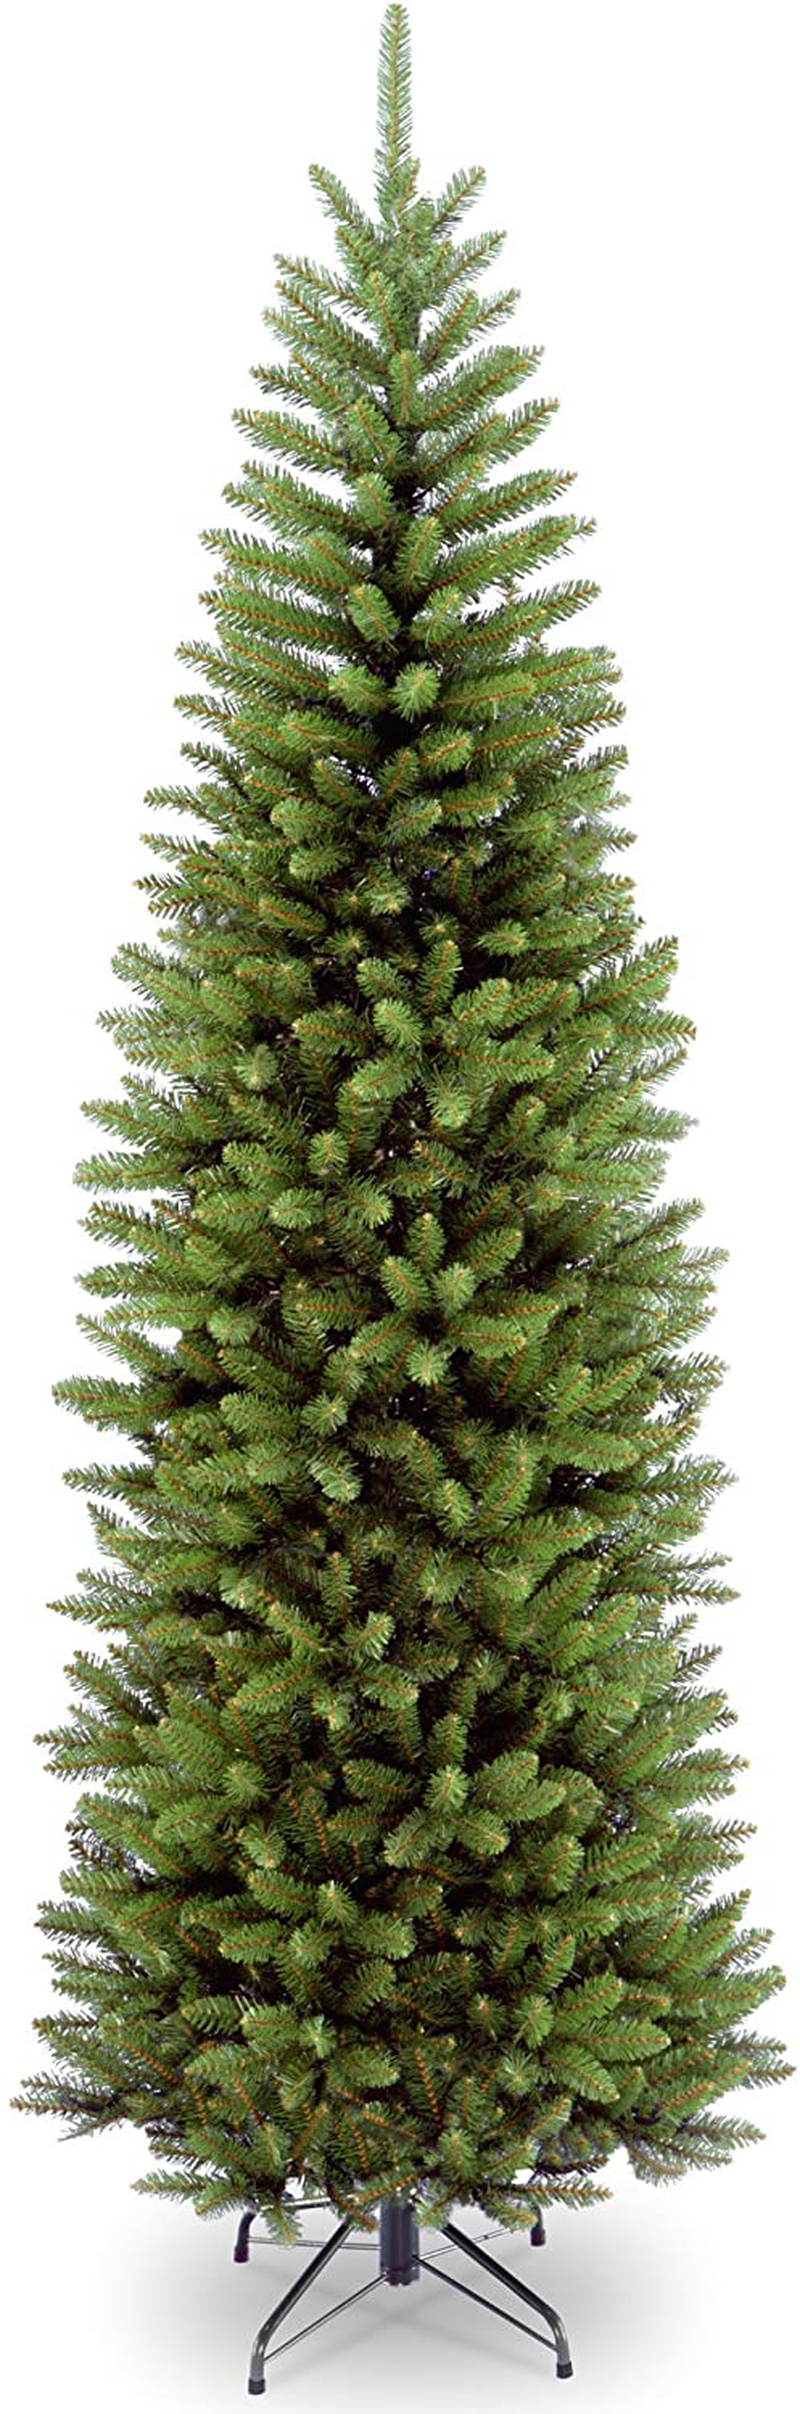 National Tree Company Artificial Christmas Tree Includes Stand, Kingswood Fir Slim - 7 ft, Green Home & Garden > Decor > Seasonal & Holiday Decorations > Christmas Tree Stands National Tree Kingswood Fir Slim - 7.5 ft  